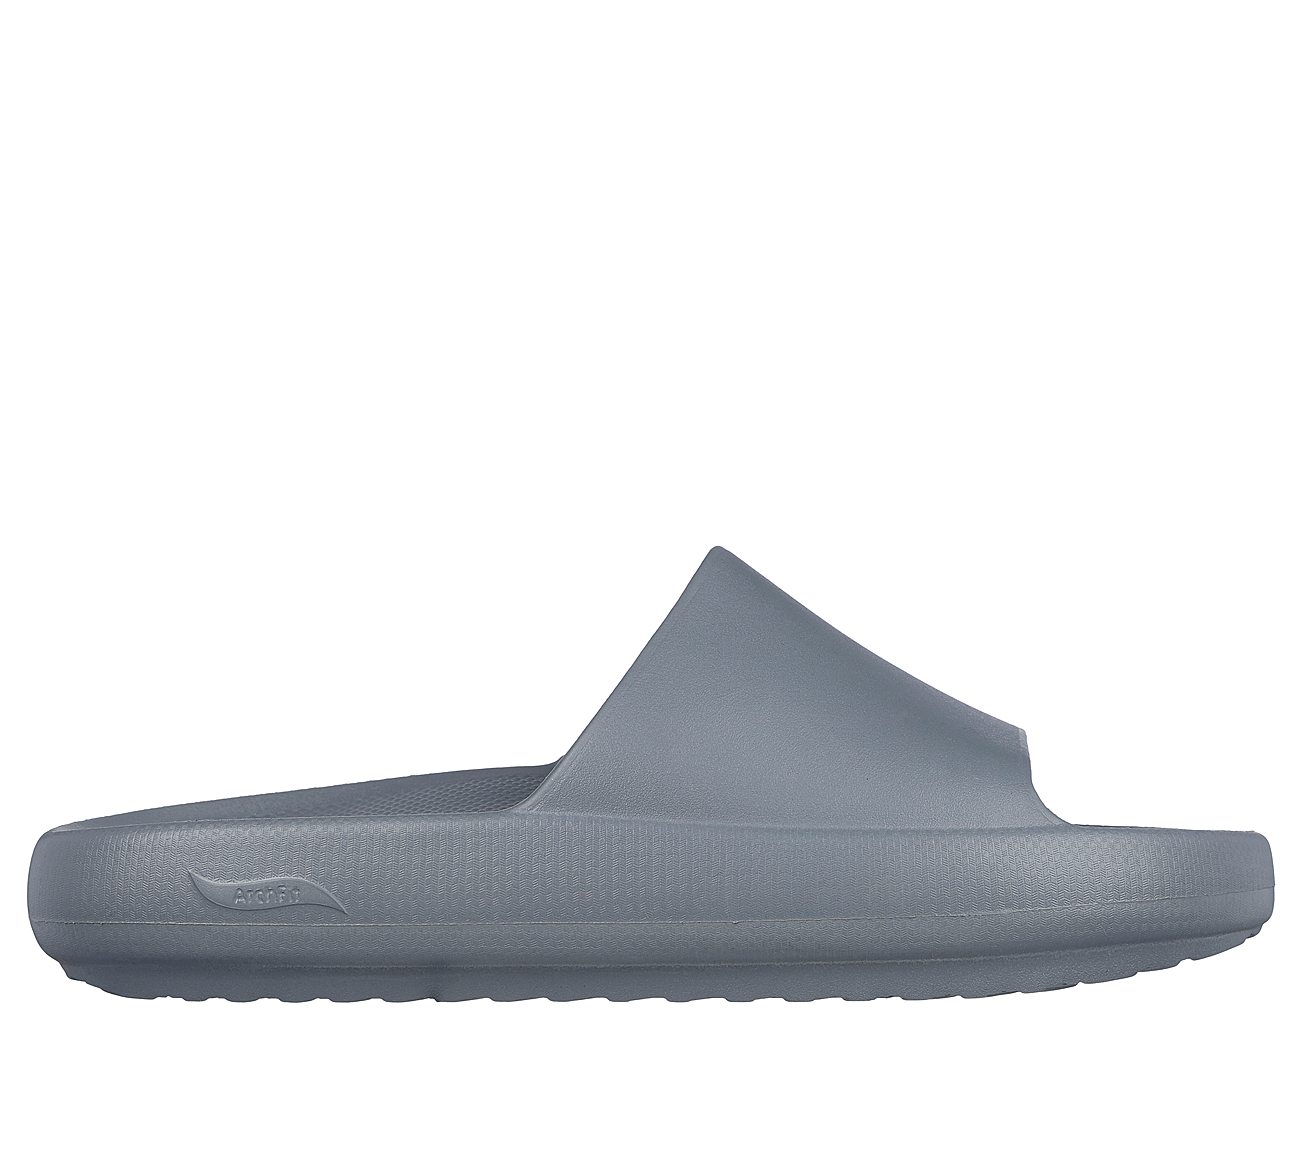 ARCH FIT HORIZON, CCHARCOAL Footwear Lateral View